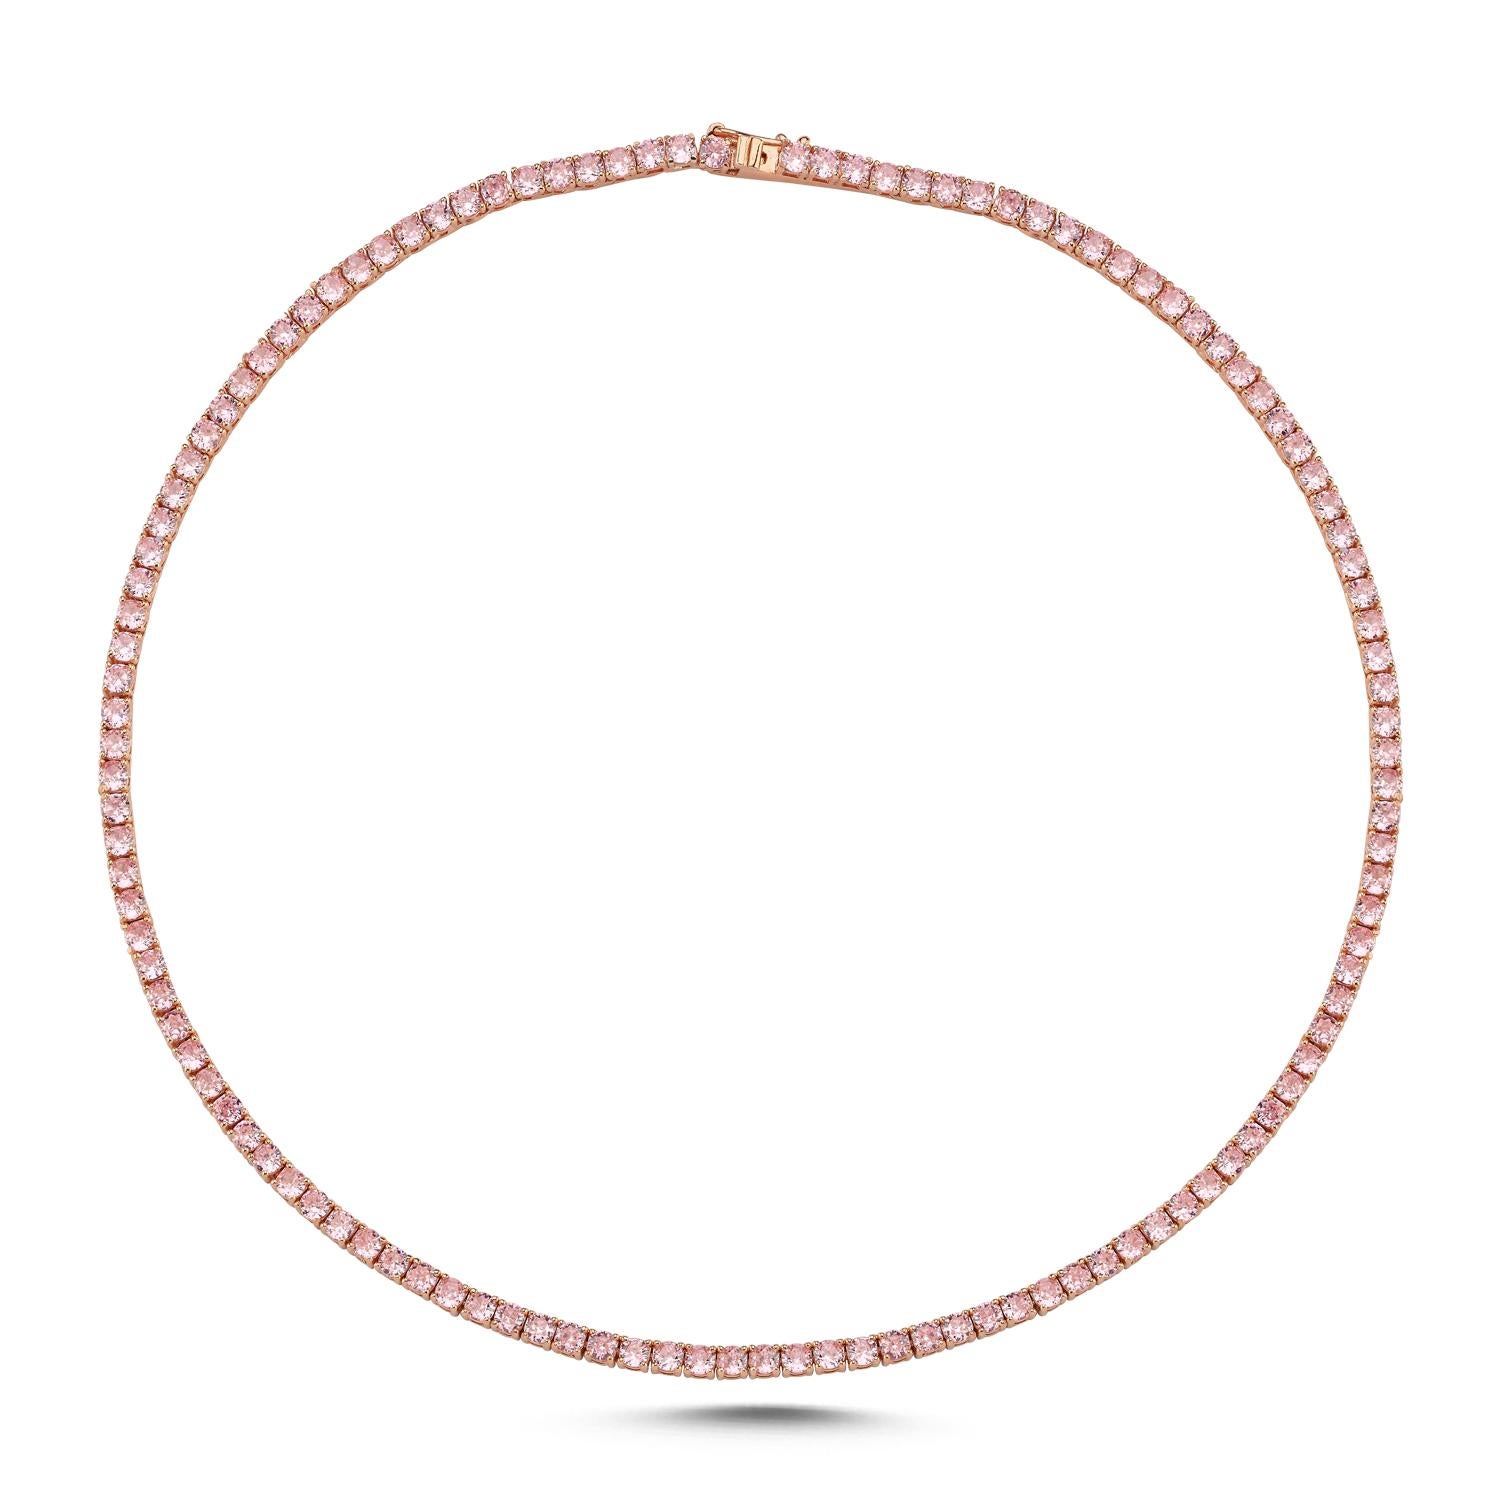 14K Rose gold pink sapphire choker necklace 3mm each stone total 14cts pink sapphires.

Starts with a 14